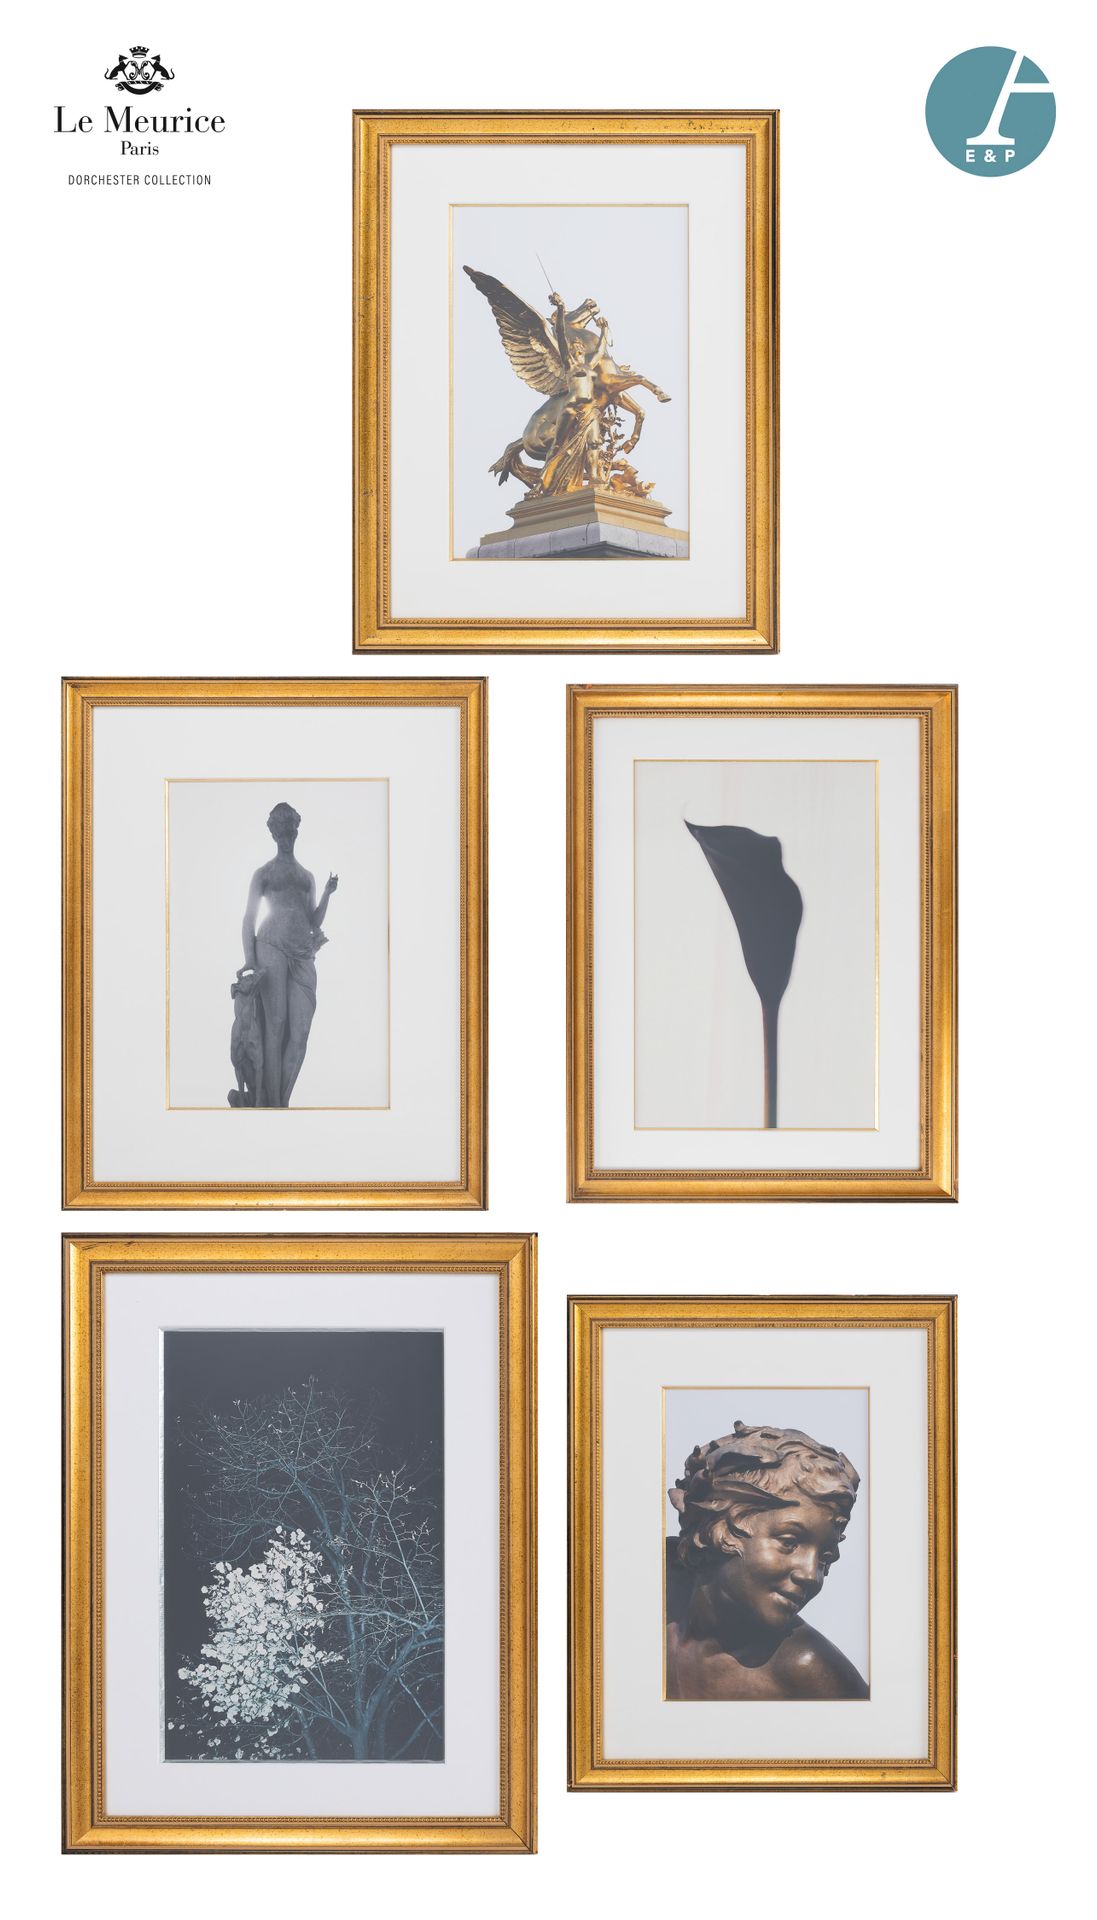 Null From Hôtel Le Meurice.
Lot of five framed photos, featuring details of scul&hellip;